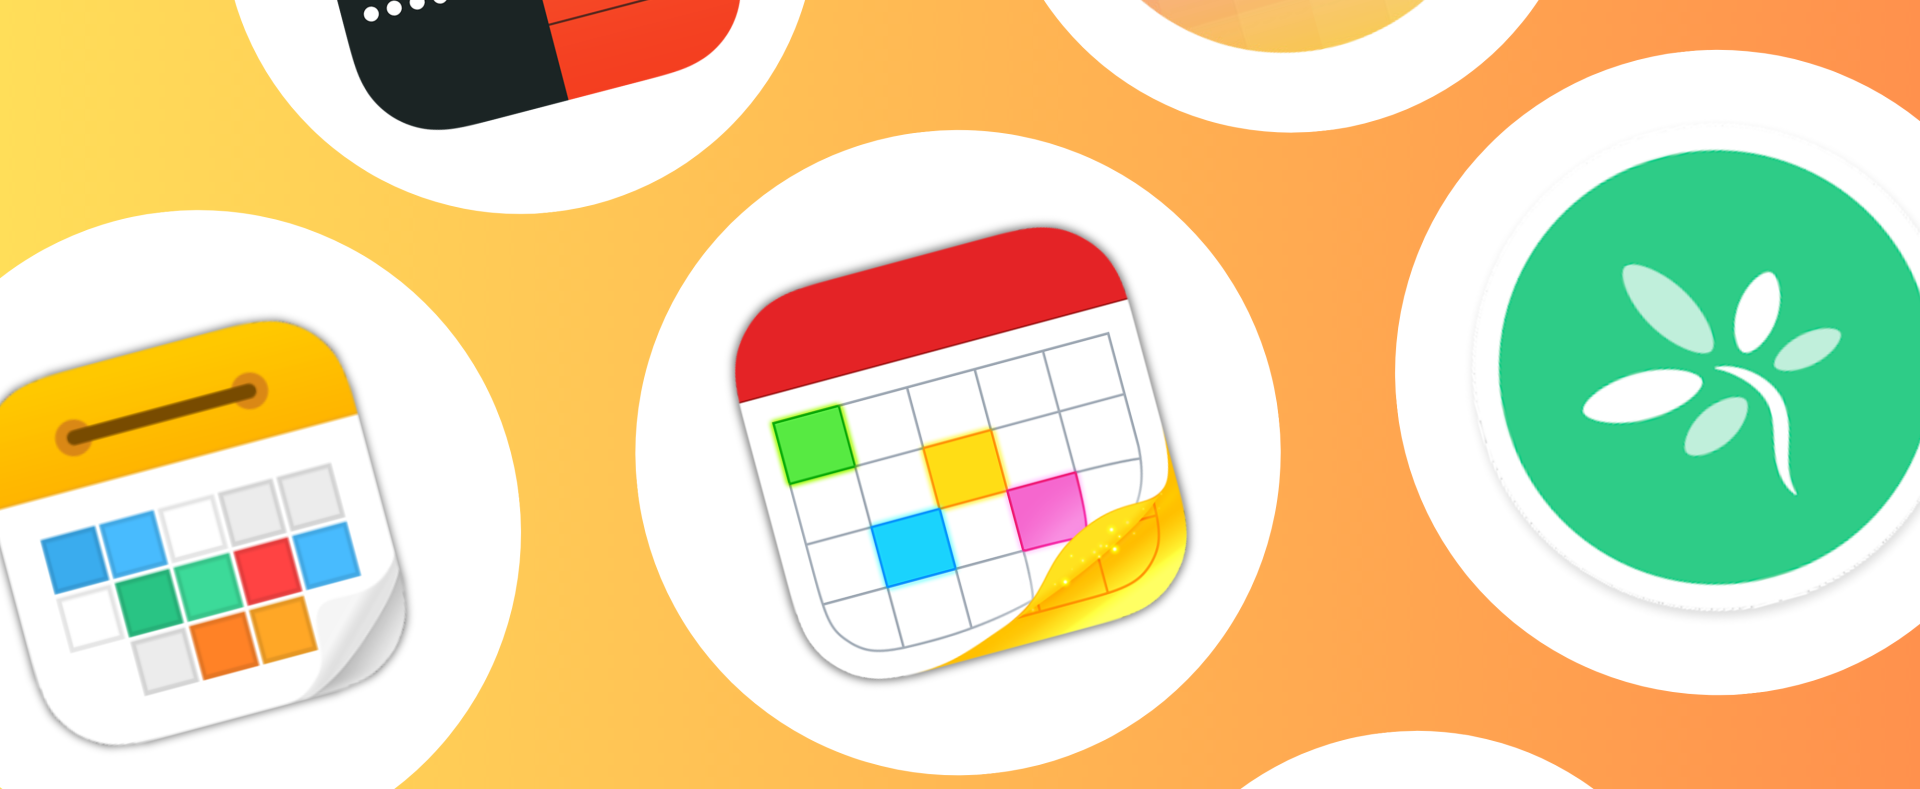 Best 10 Calendar Apps for 2023: Our Top Recommendations thumbnail image